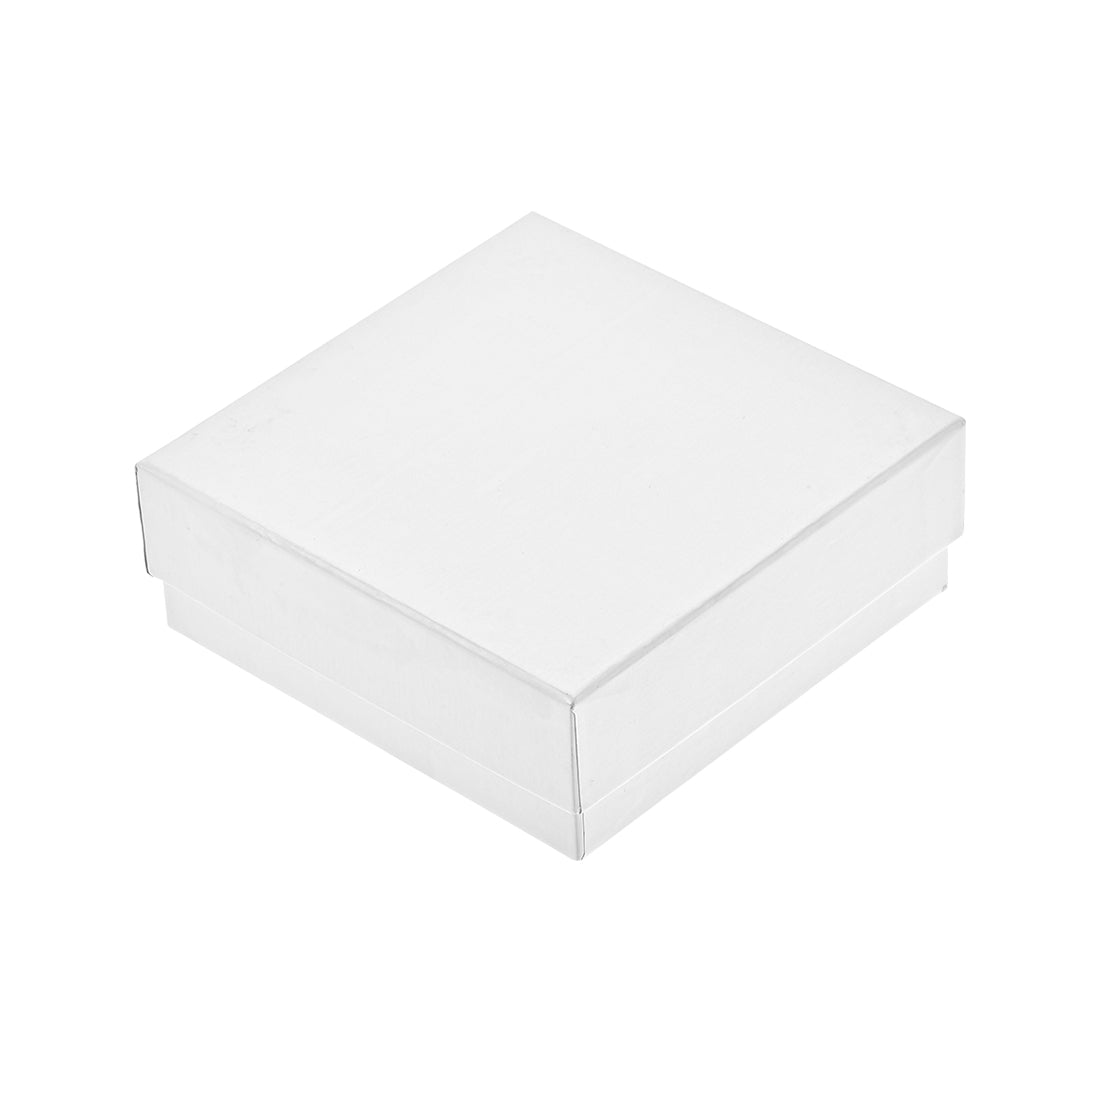 Uxcell Uxcell Freezer Tube Box 100 Places Waterproof Cardboard Holder Rack for 1.5/1.8/2ml Microcentrifuge Tubes